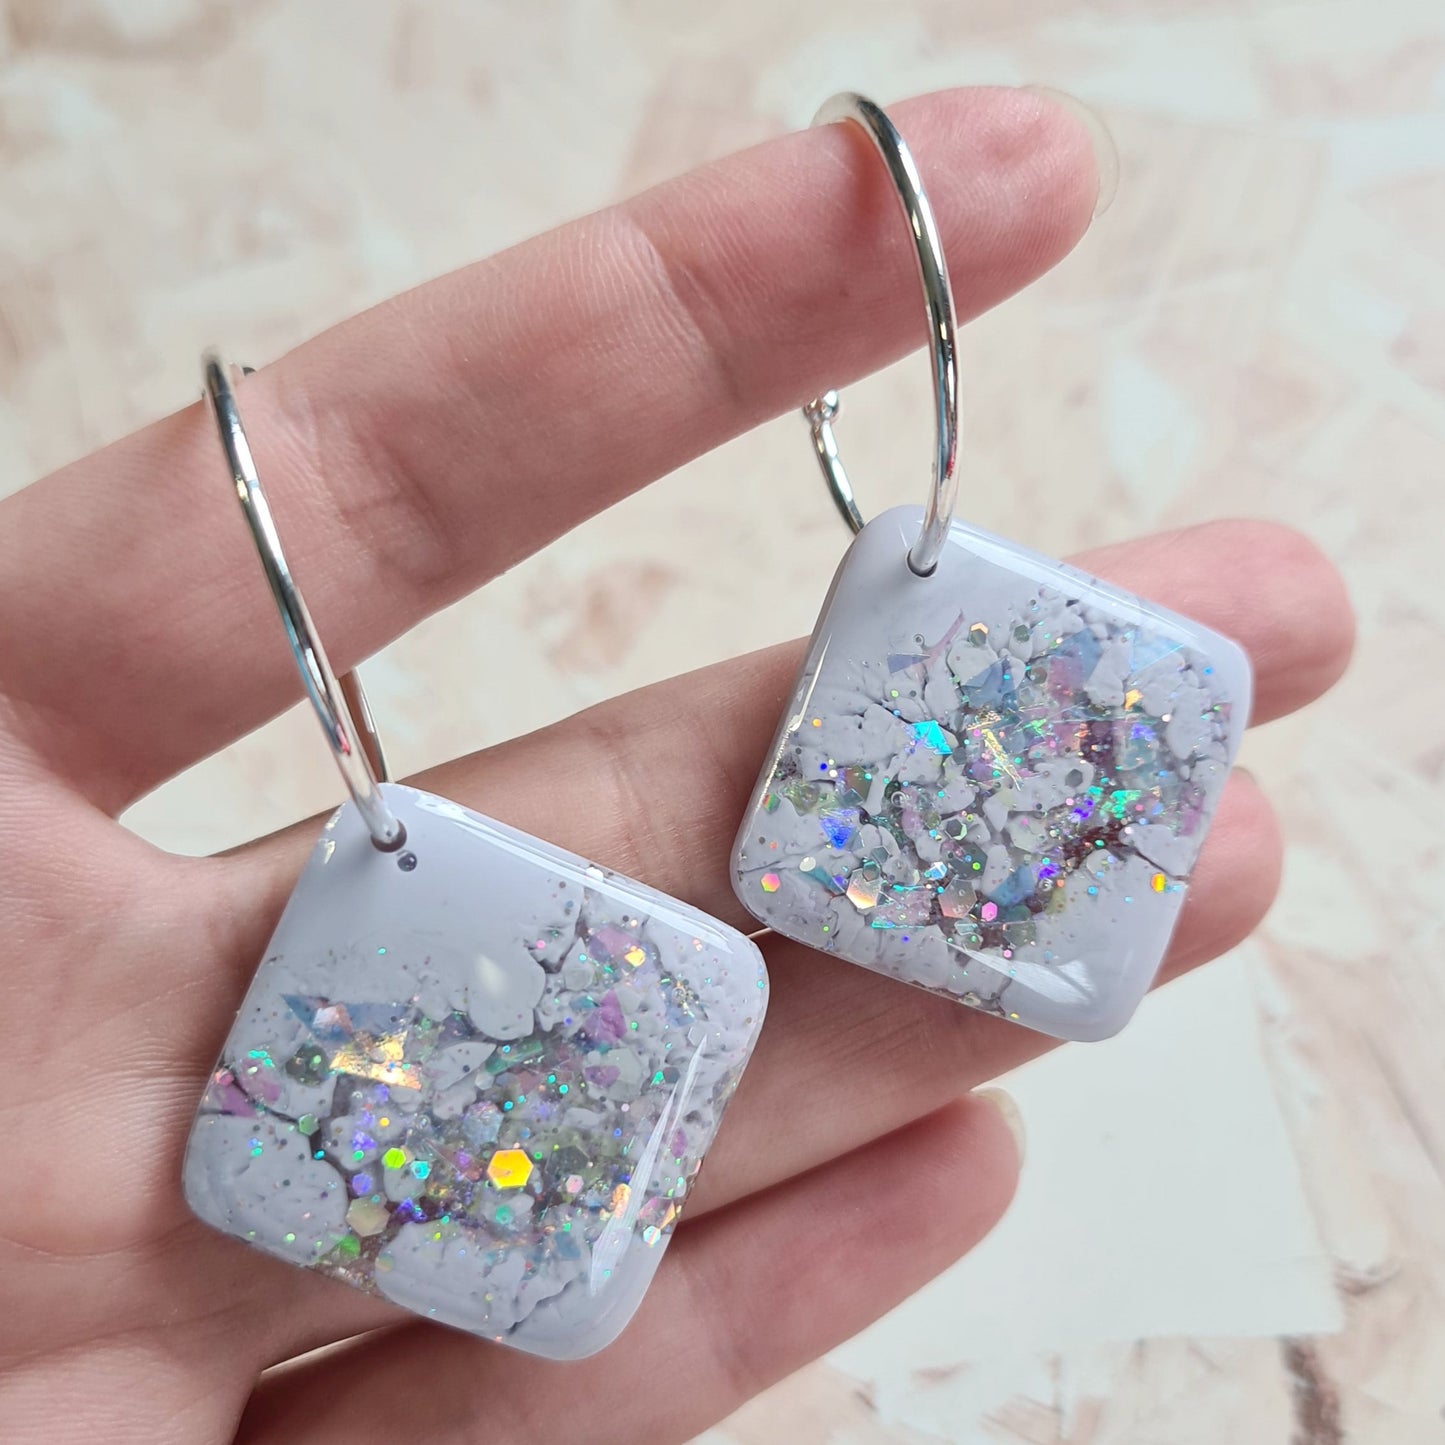 Holographic Party Glitter Earrings  Resin Earrings – Illuminated